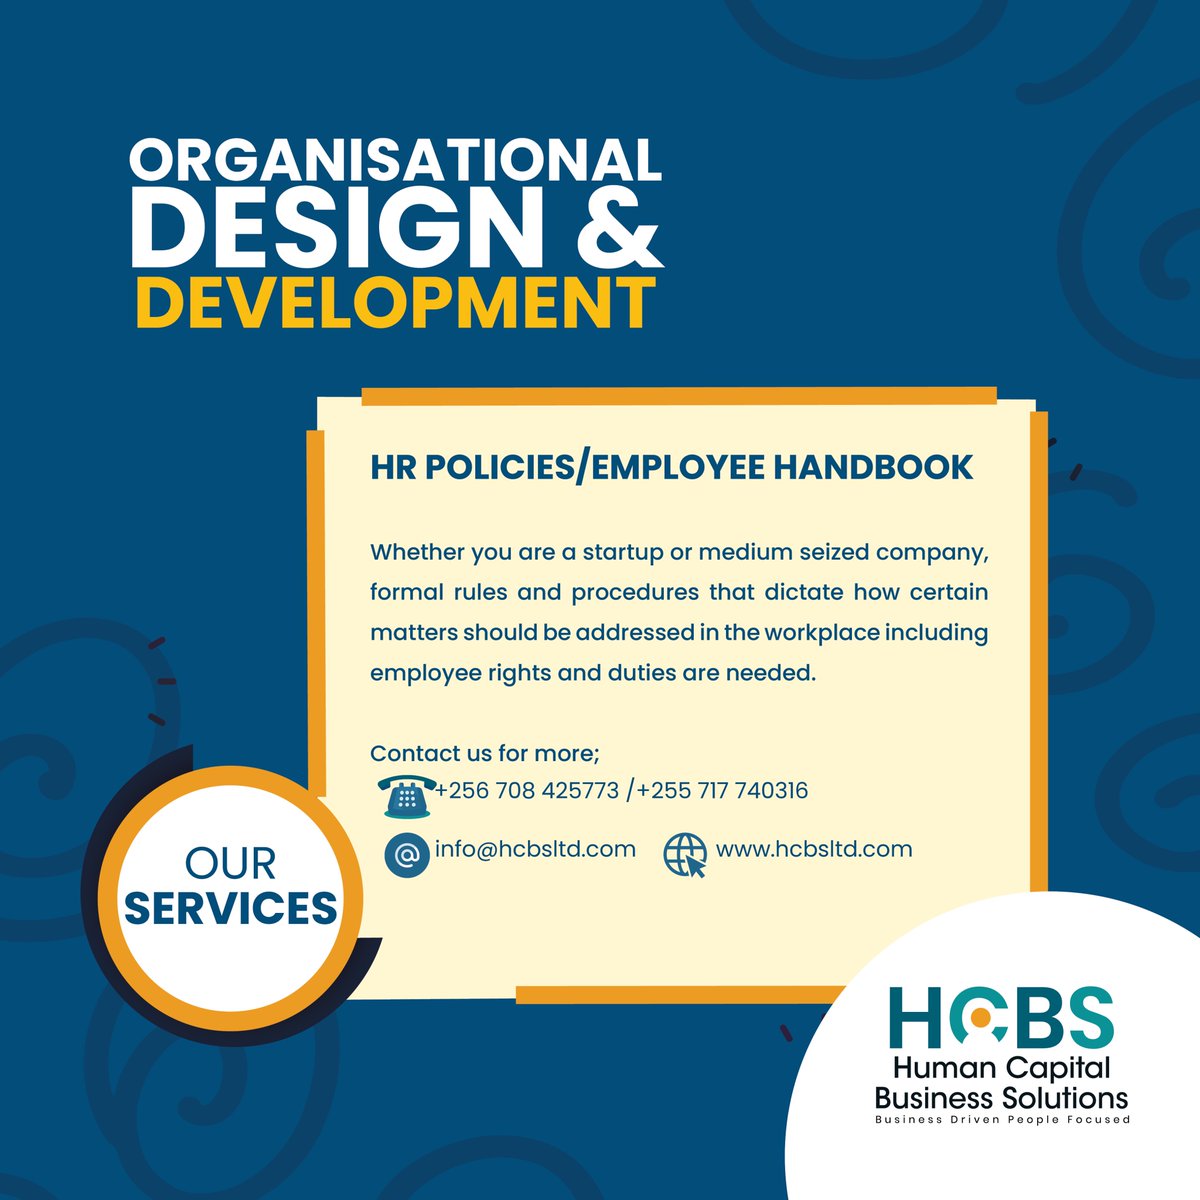 #HCBSServices: HCBS is ideal to take you through the HR Policies/employee handbook process formulation and implementation.